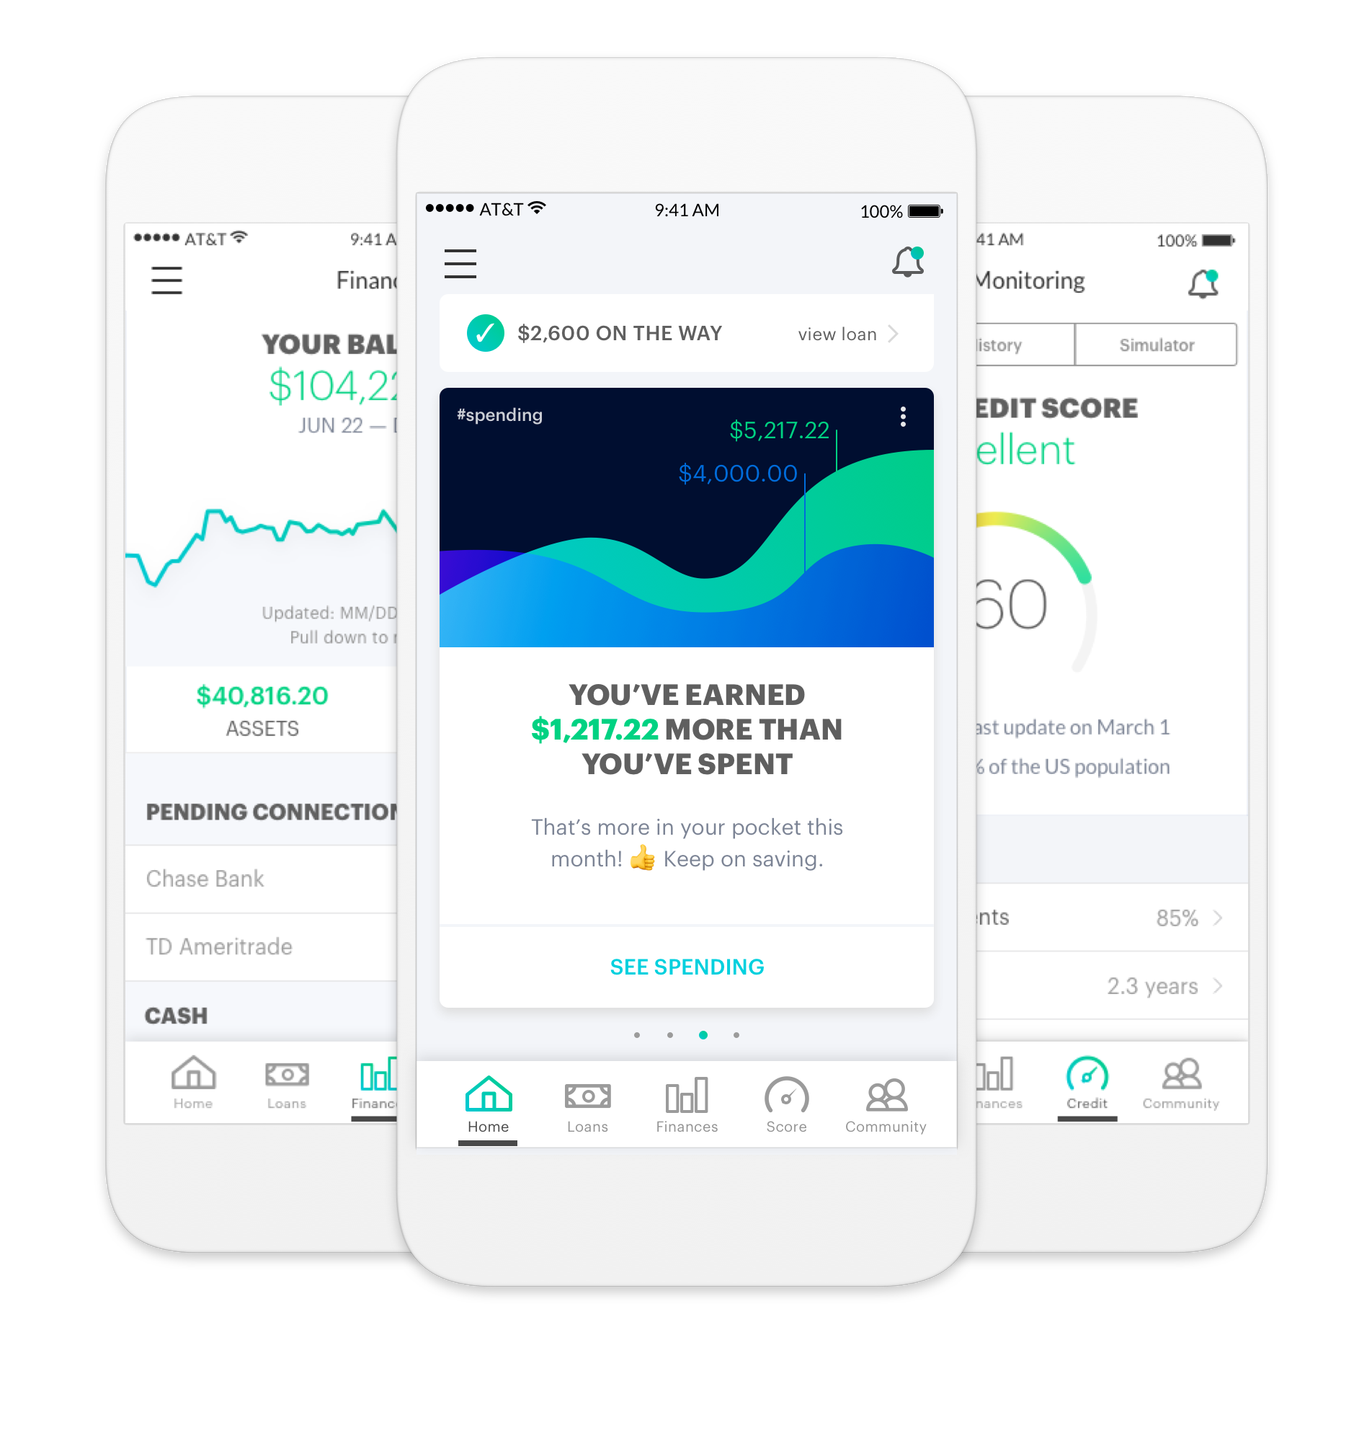 MoneyLion’s redesigned app gives personalized financial advice and instant access to personal loans